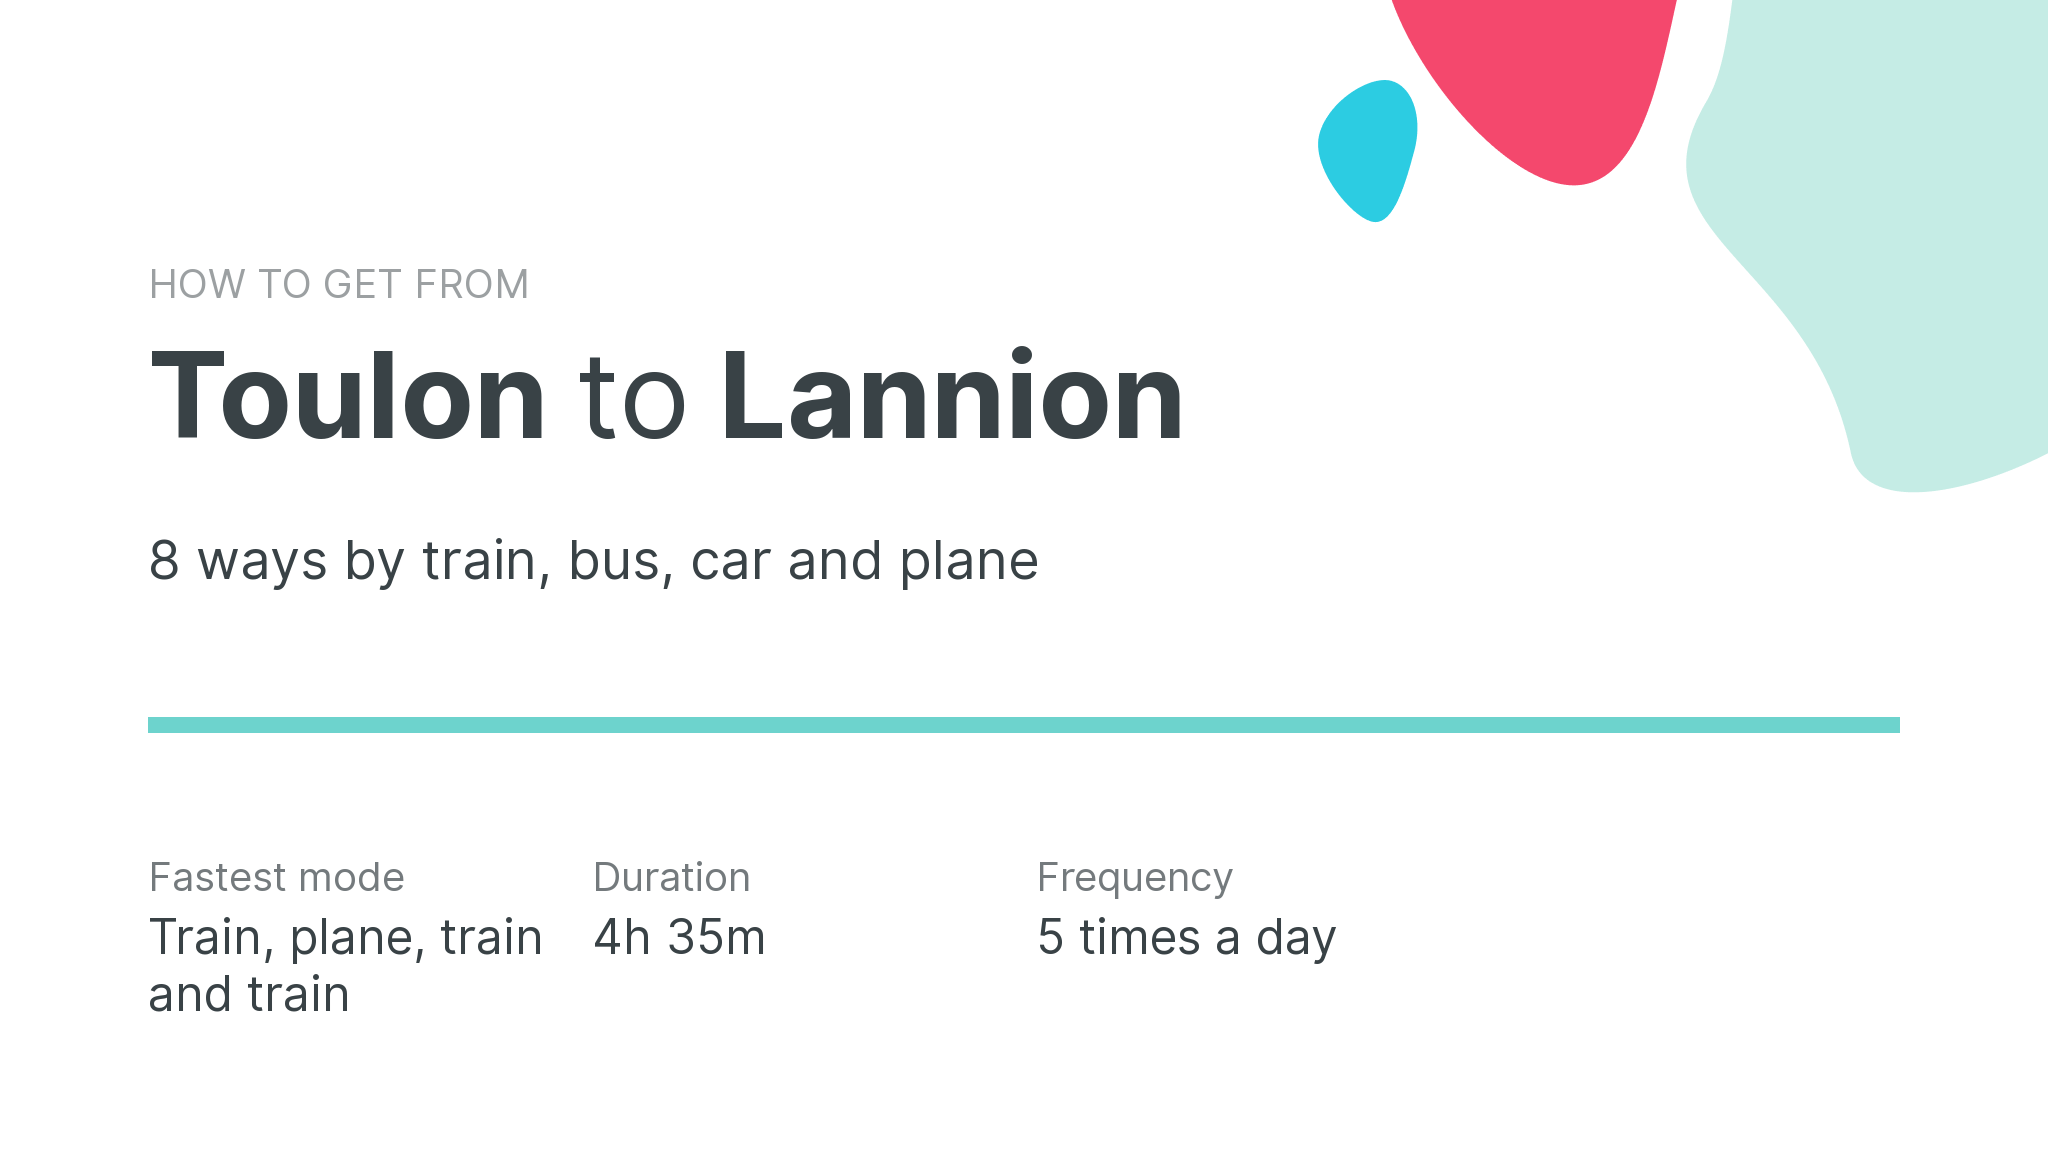 How do I get from Toulon to Lannion